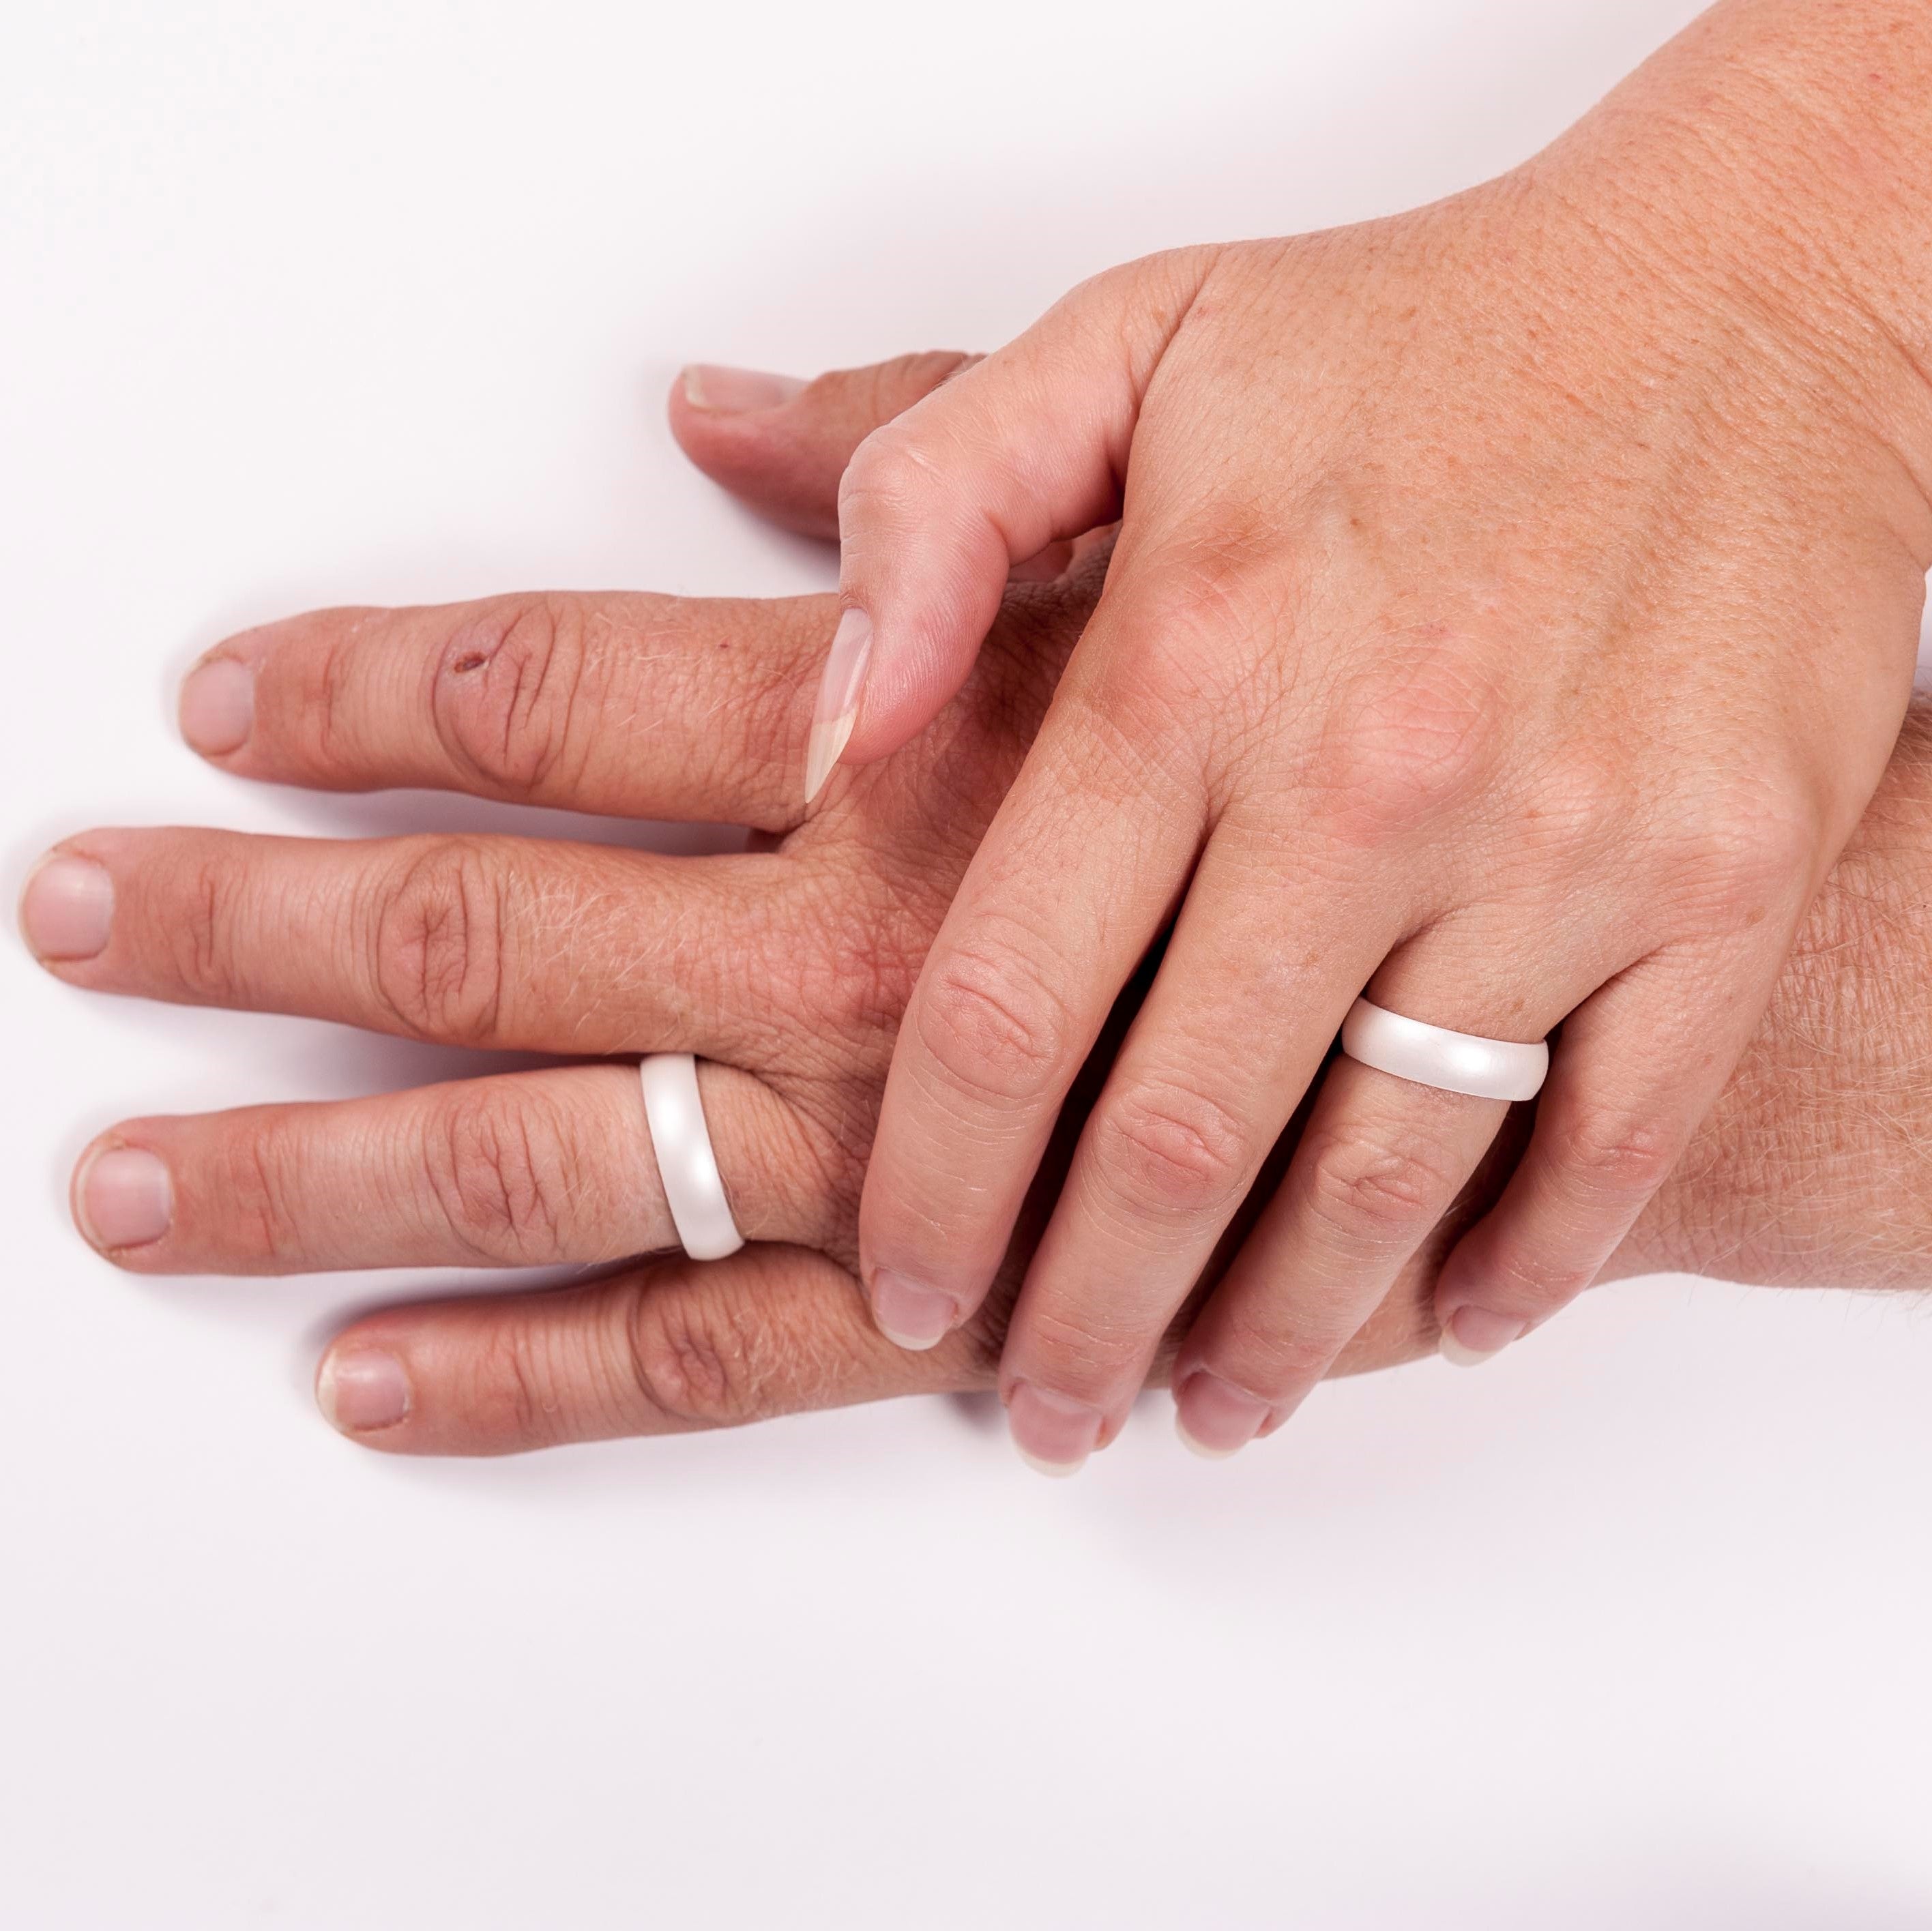 Why wear a silicone wedding ring? – SafeRingz